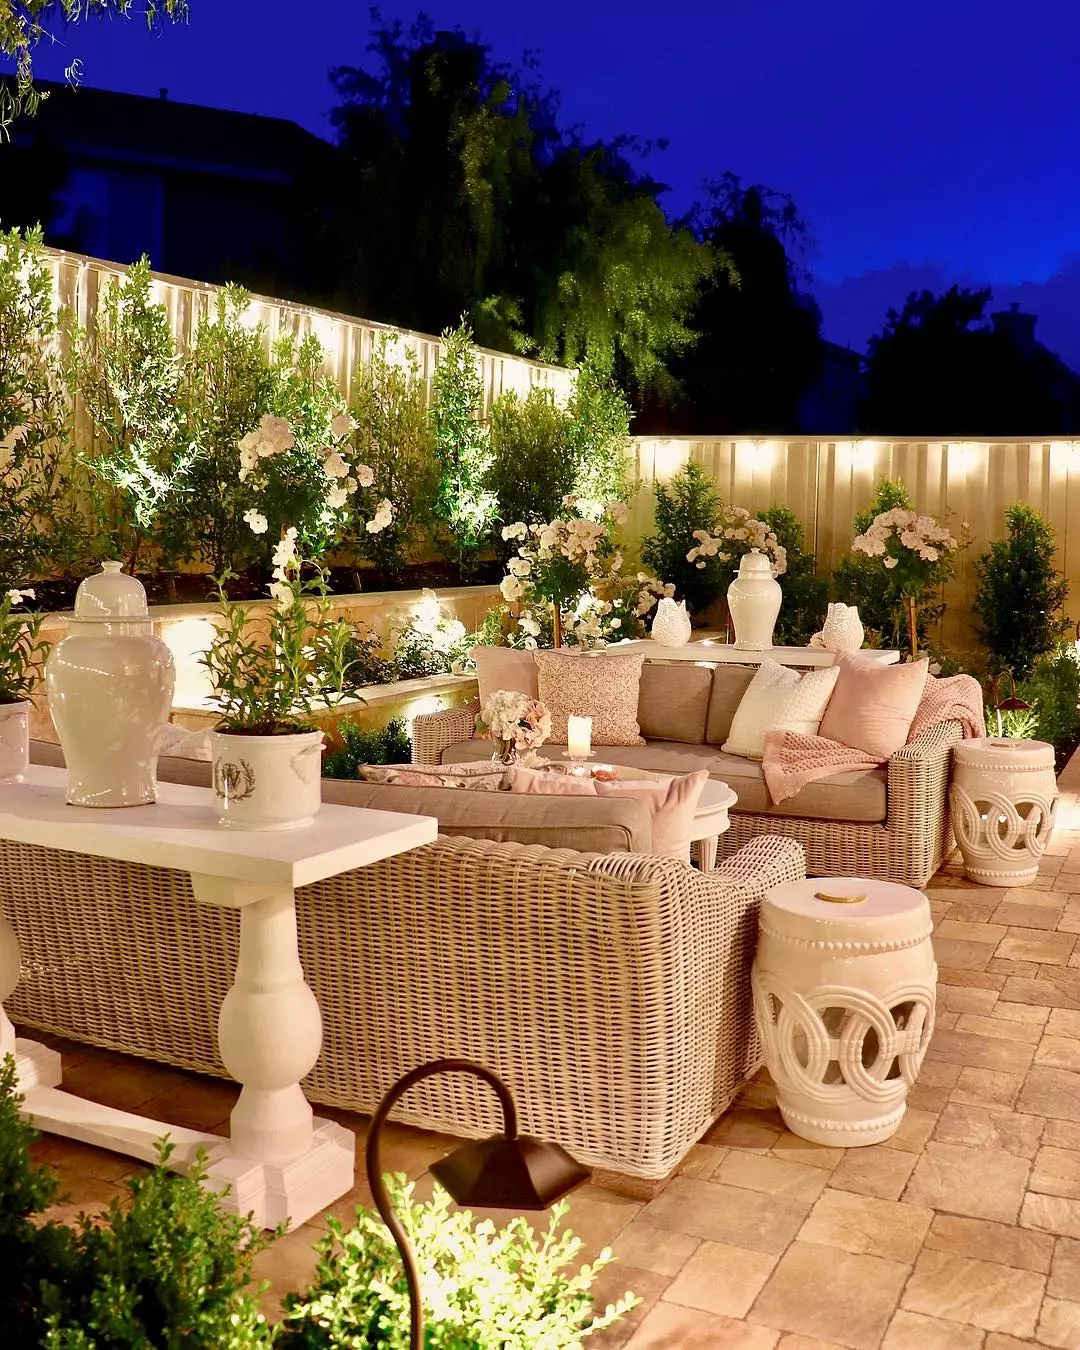 24 ideas for designing a backyard party space | extra space storage